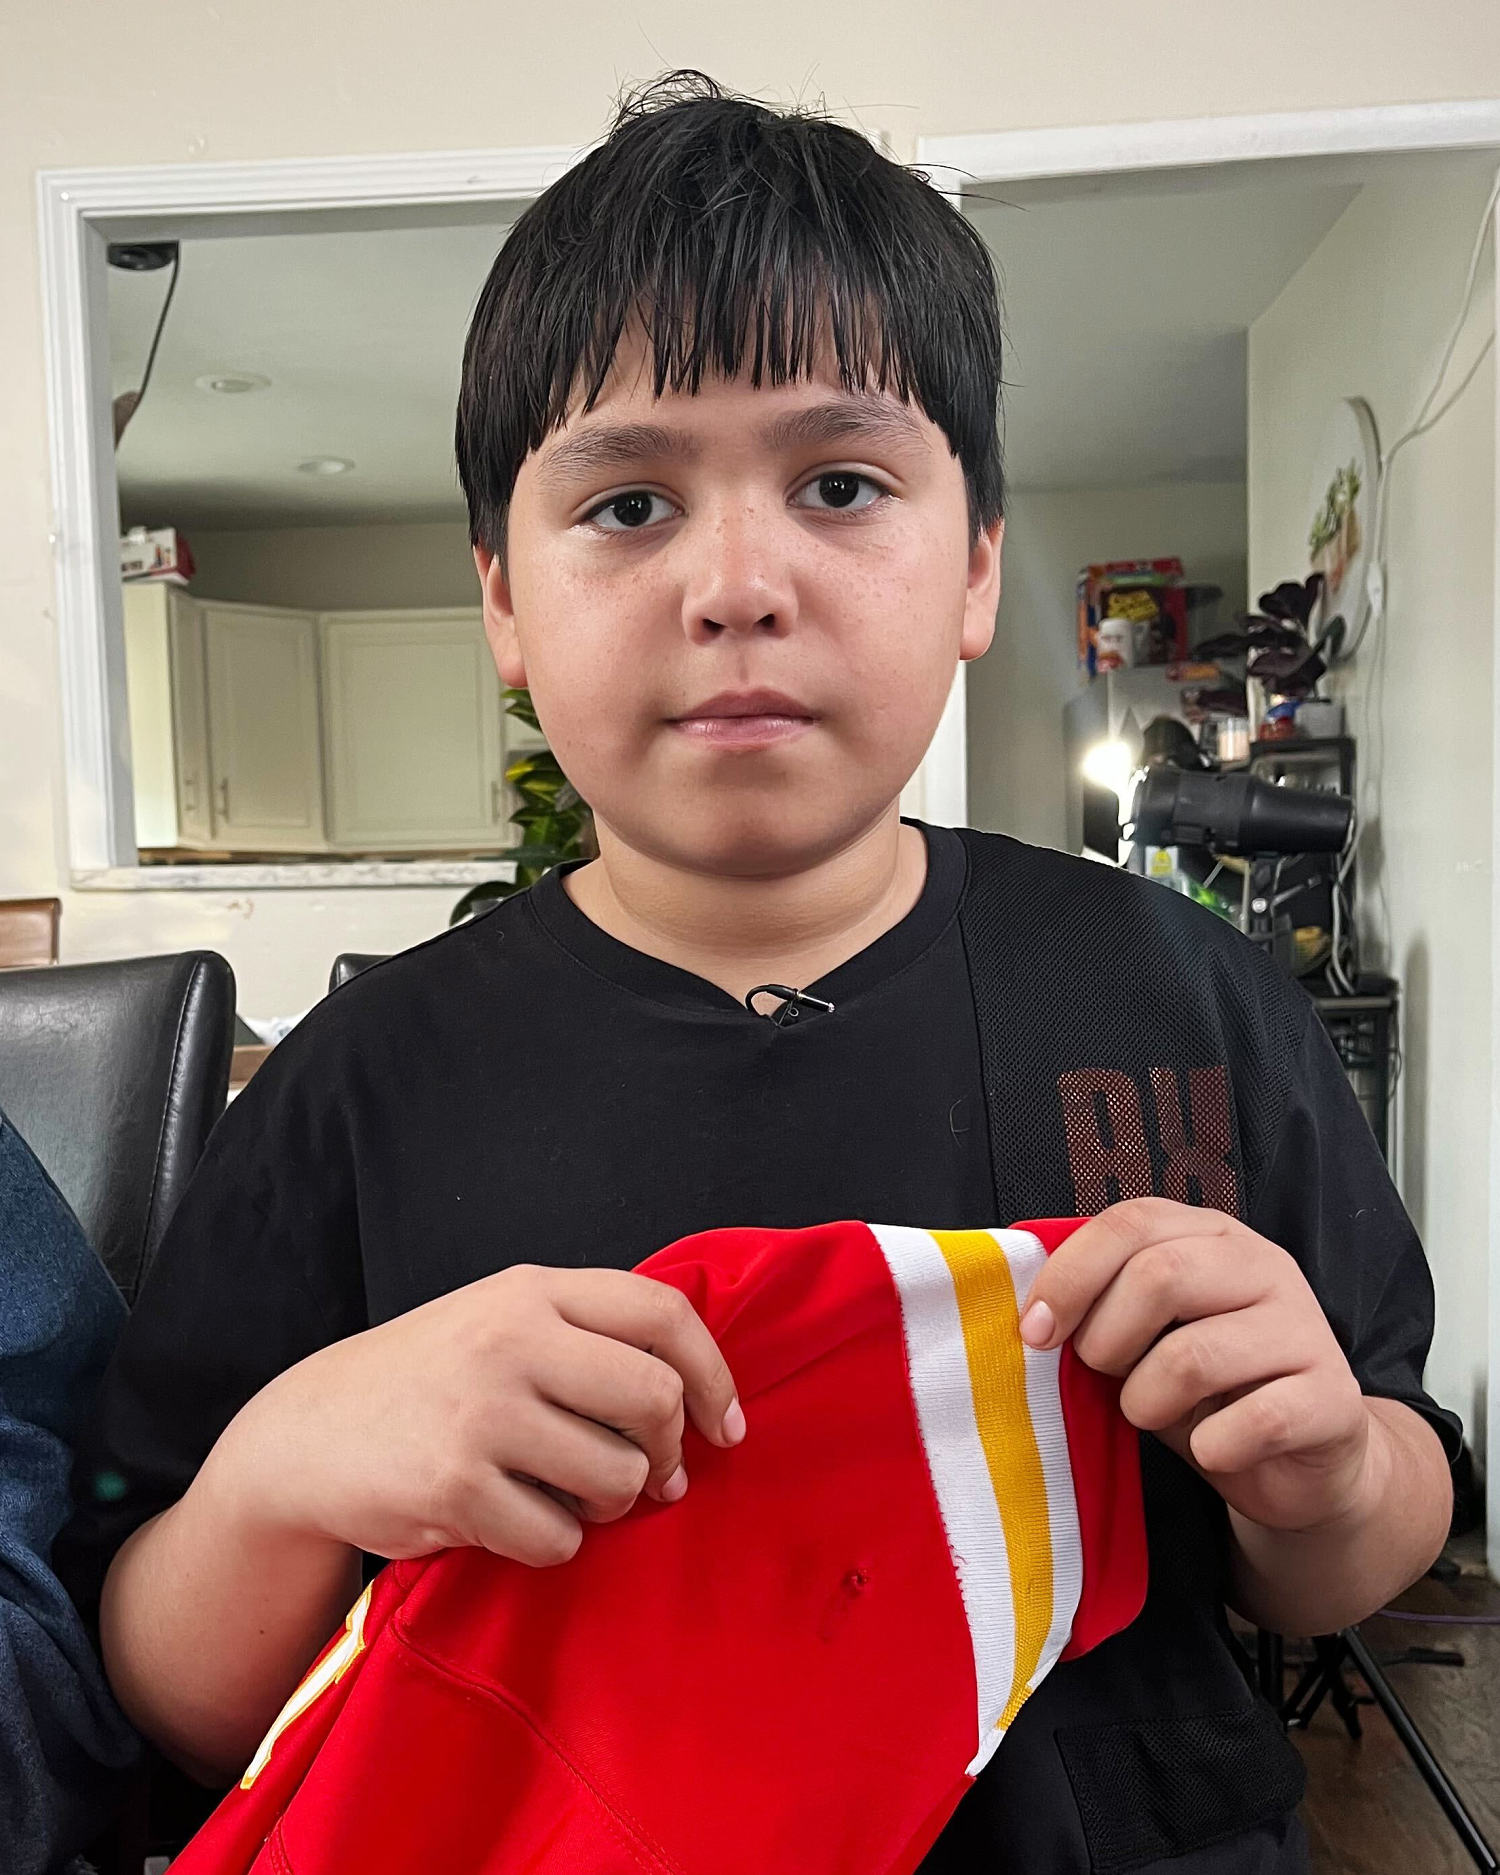 10-year-old struck by bullet at Chiefs parade says surviving shooting was a ‘miracle’